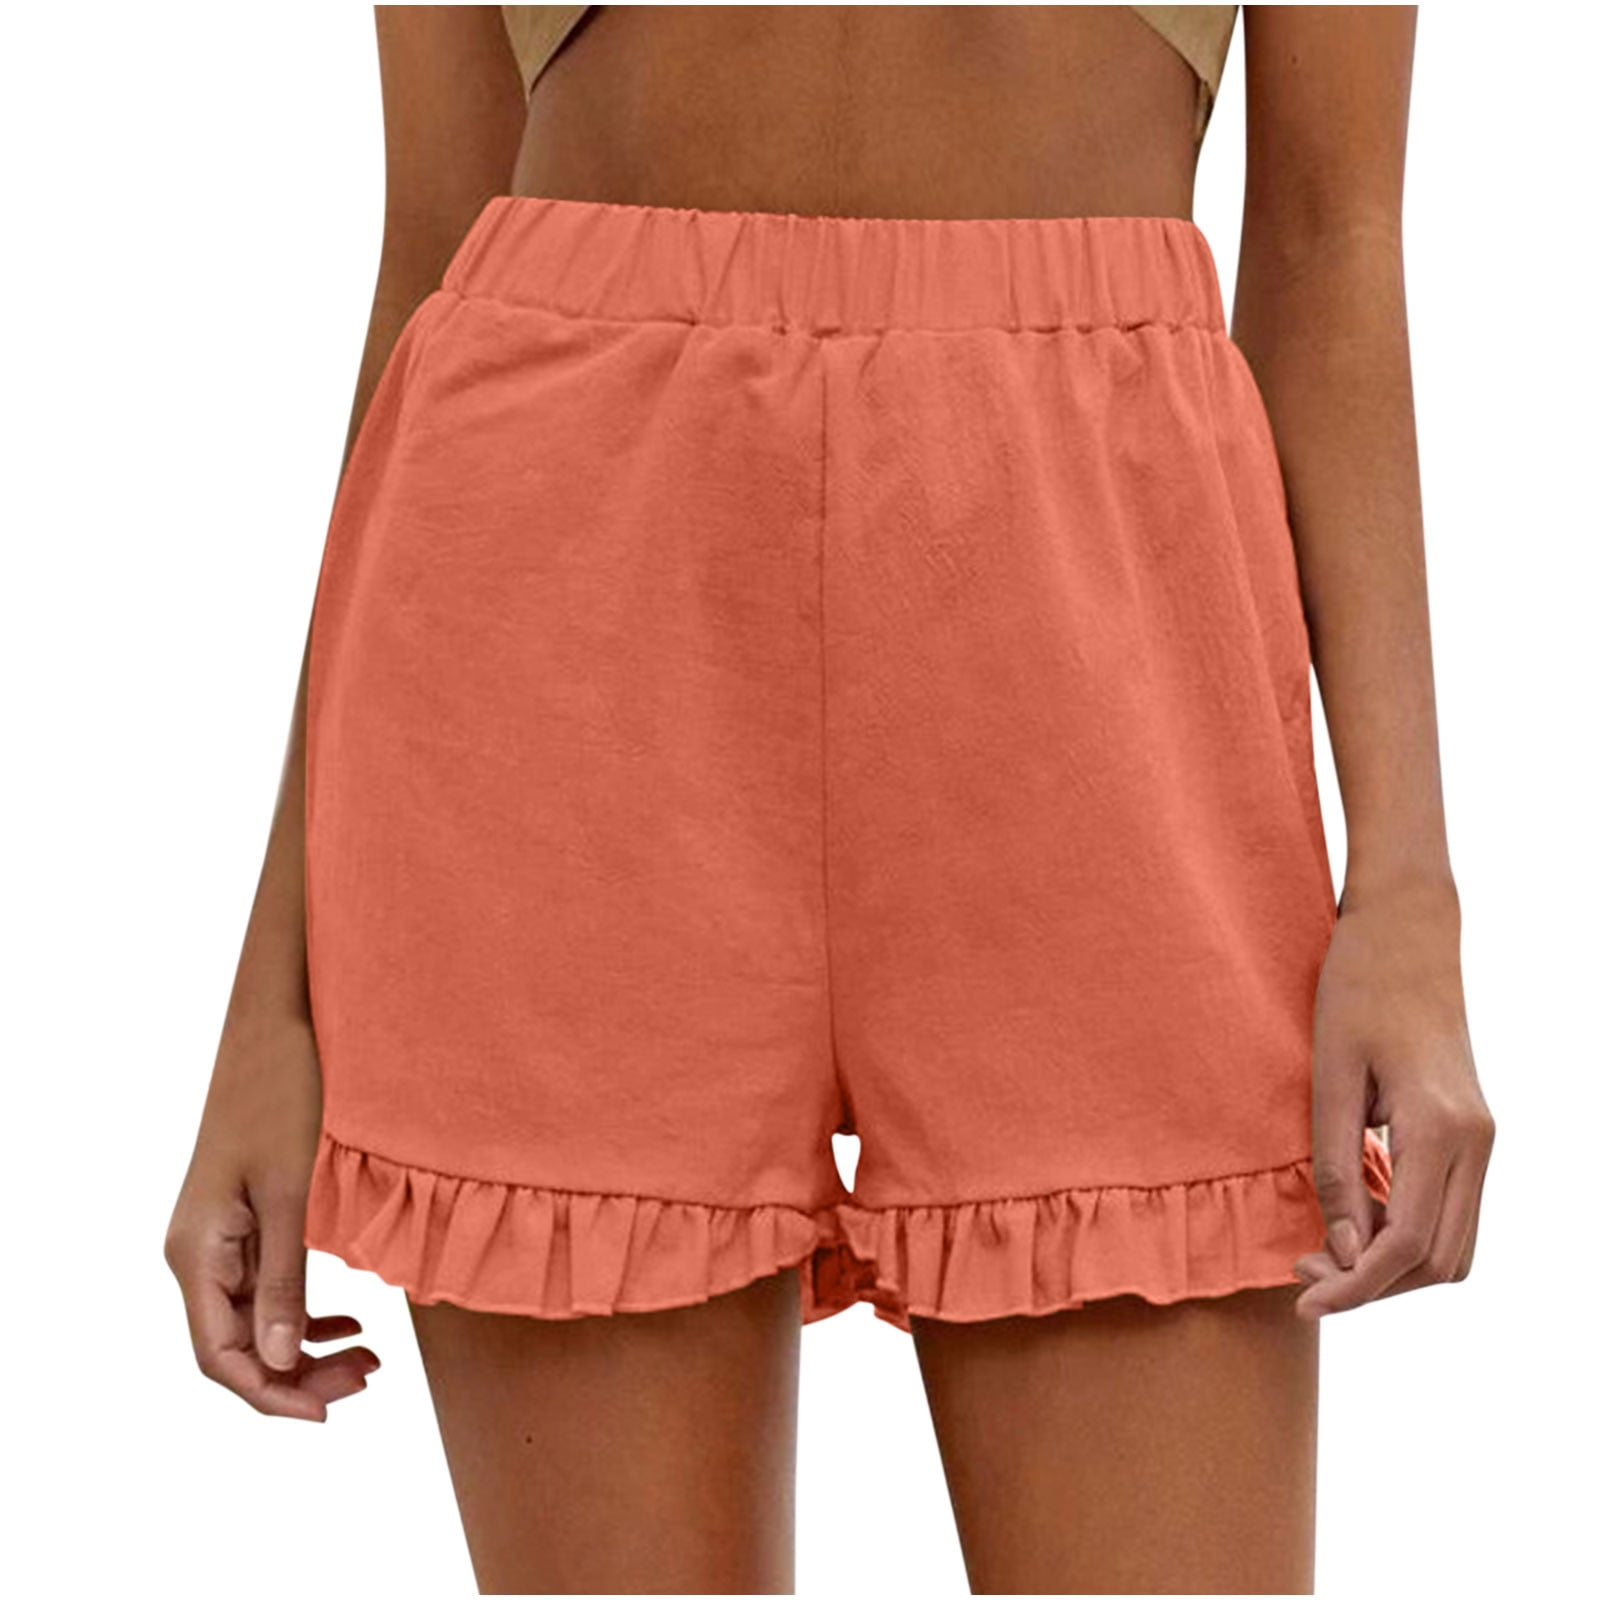 Kamo Fitness High Waisted Activewear Shorts for Sale in Chino